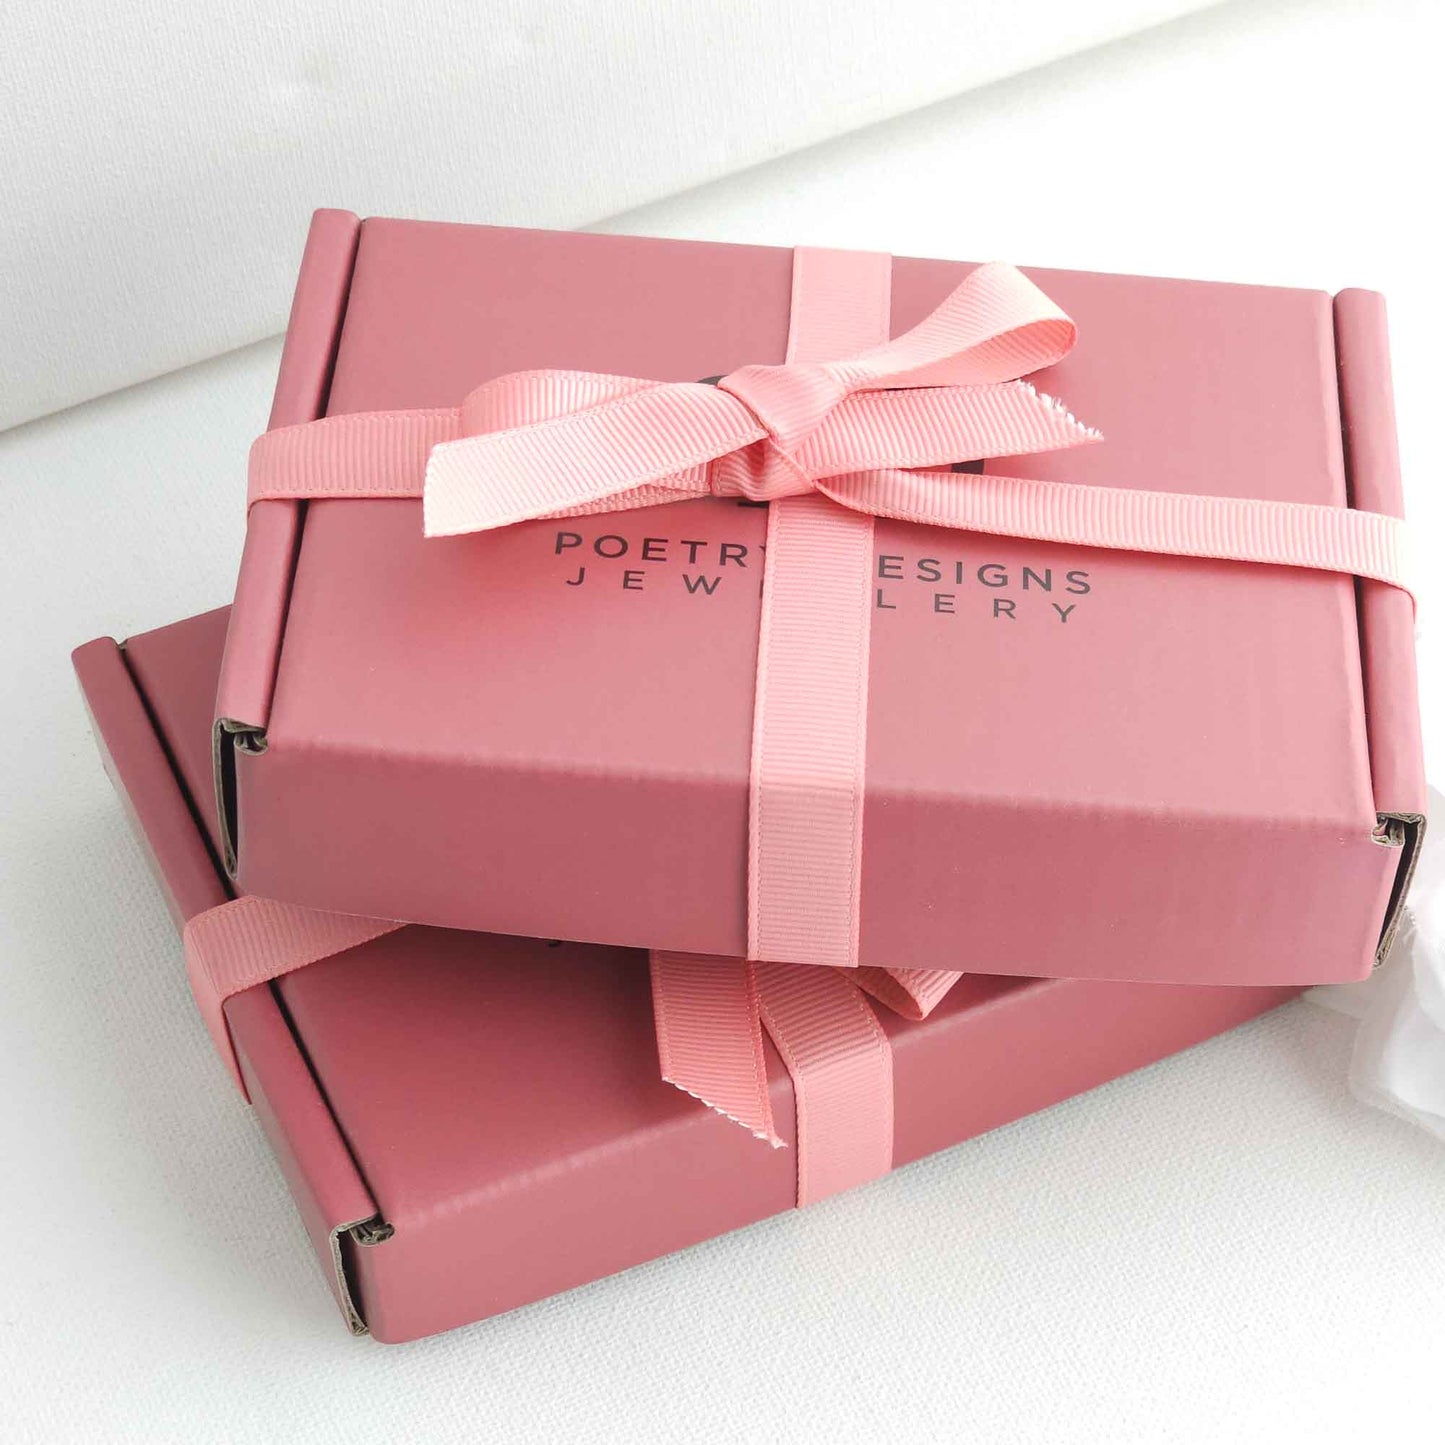 Poetry Designs Bridesmaids and Wedding Gift Packaging